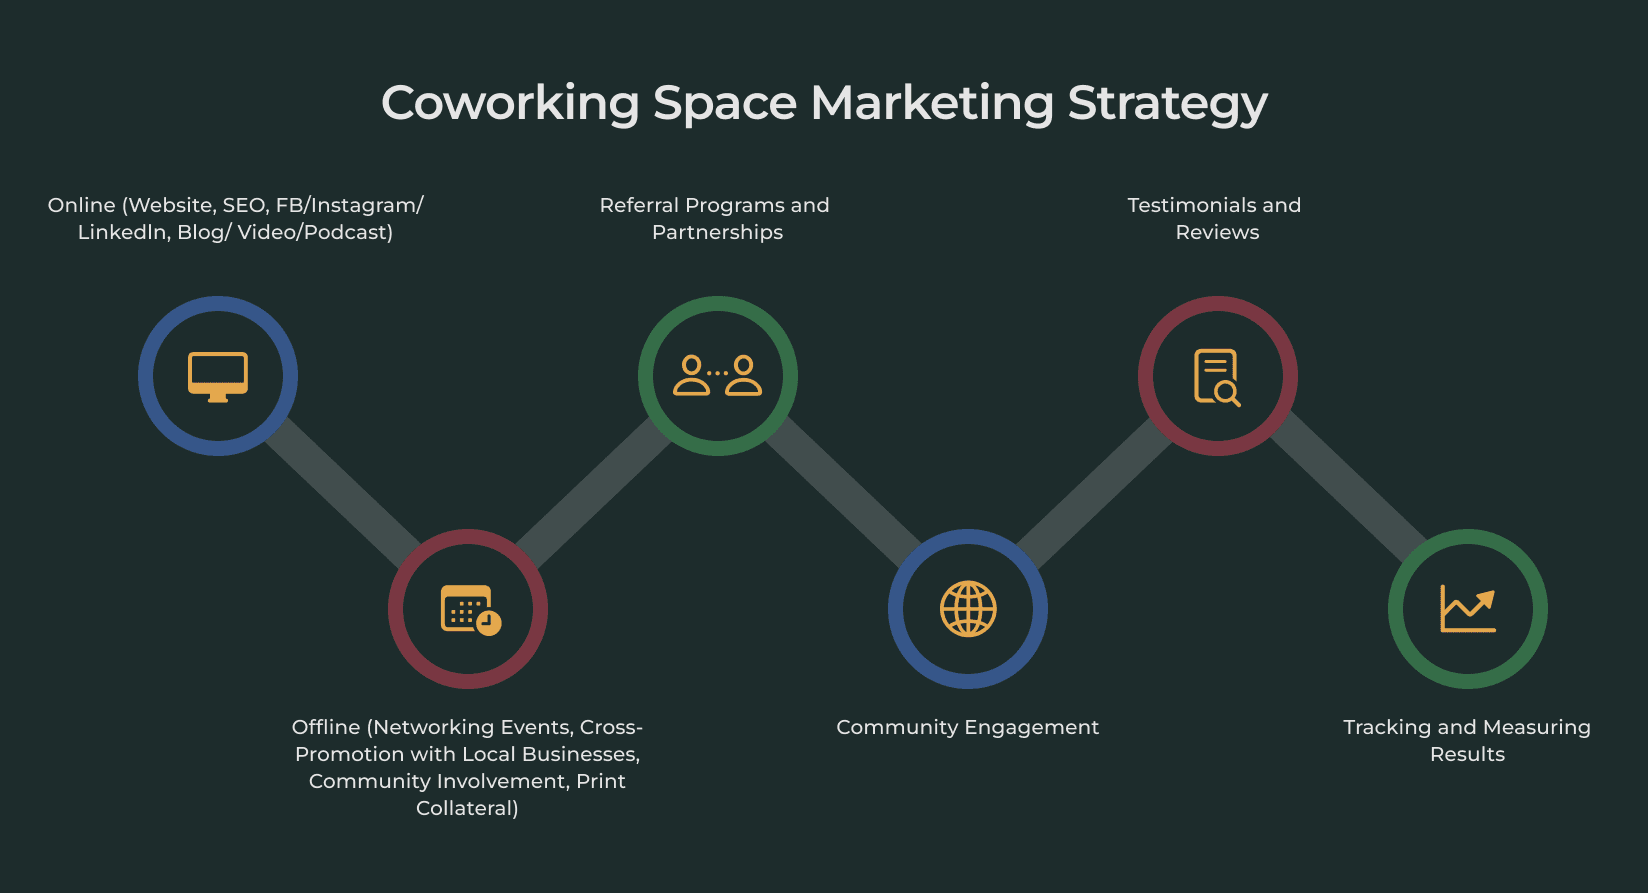 Coworking space marketing strategy